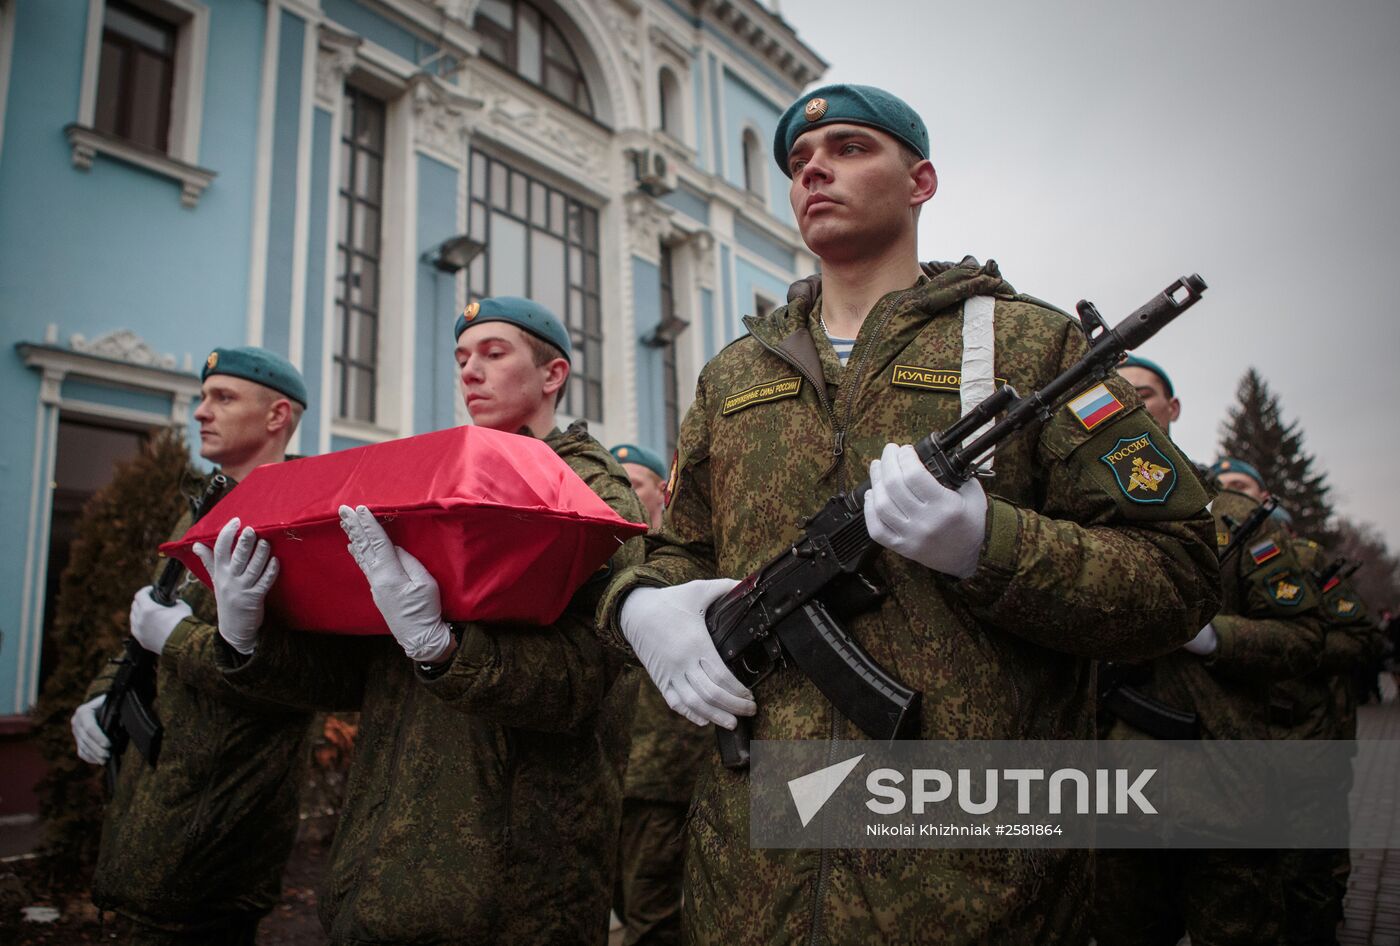 Remains of soldiers who died in Great Patriotic War are reburied in Ukraine